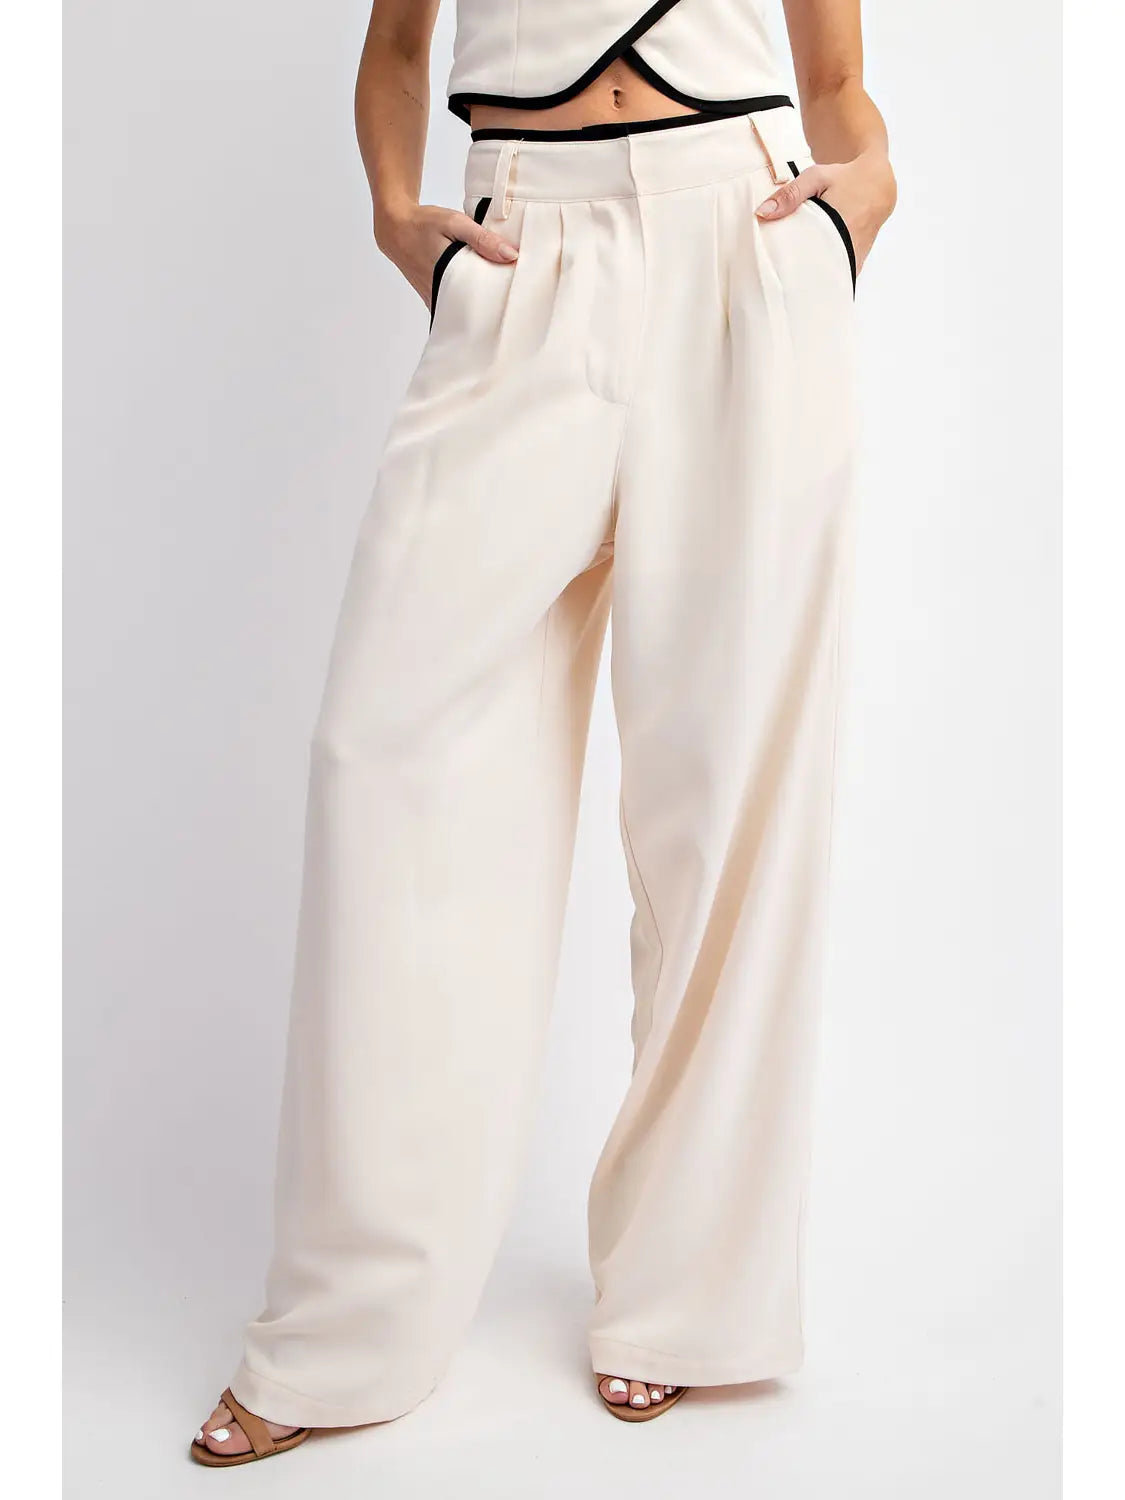 Long Woven Pants With Contrast Edge, Pants by Edit By Nine | LIT Boutique